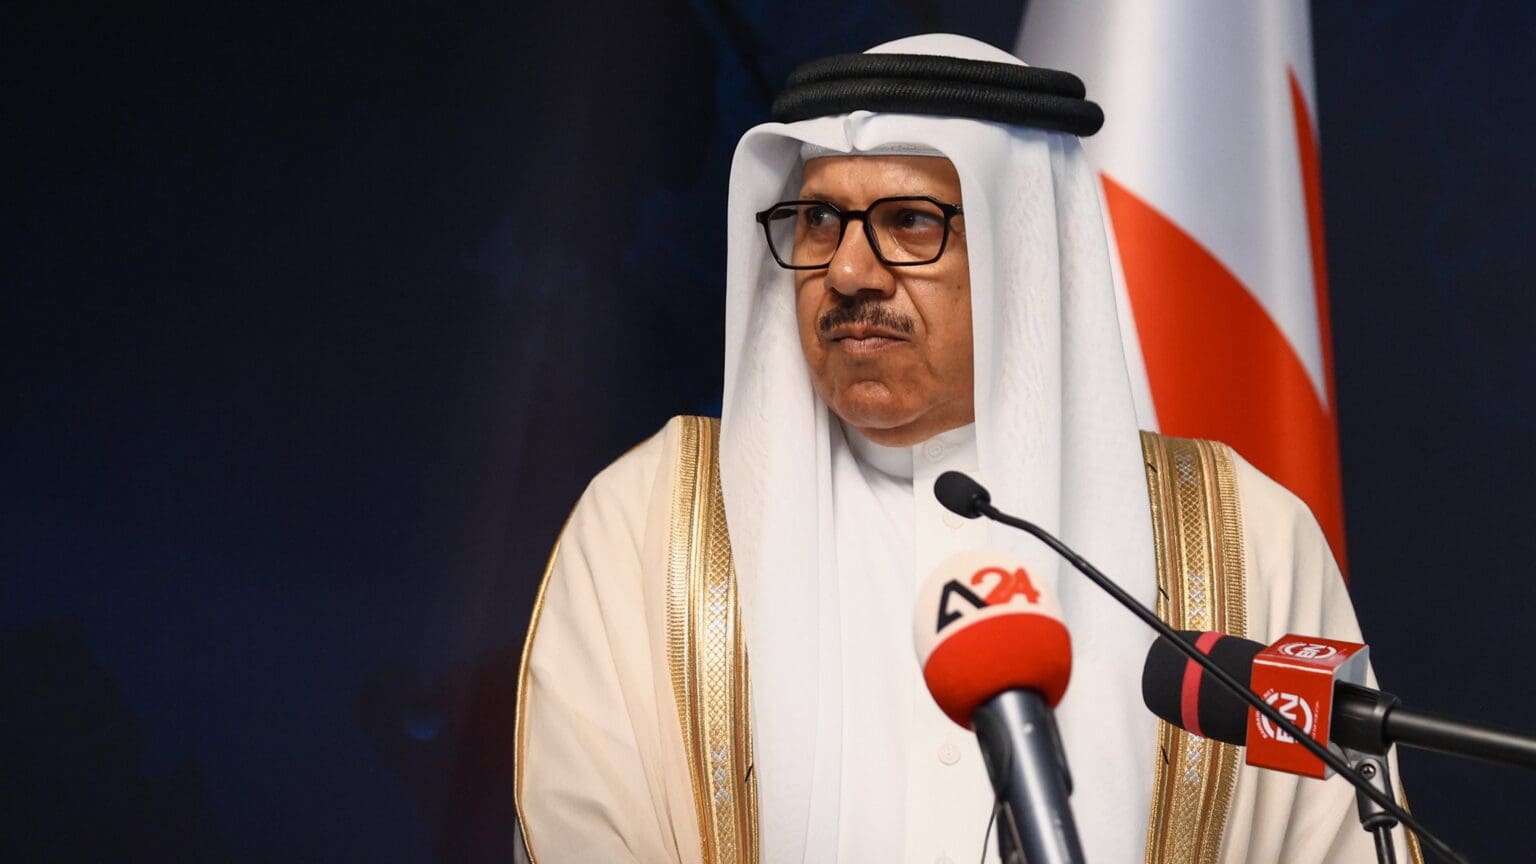 Bahraini Foreign Minister: ‘When Israel feels unsafe, “bad things happen”’